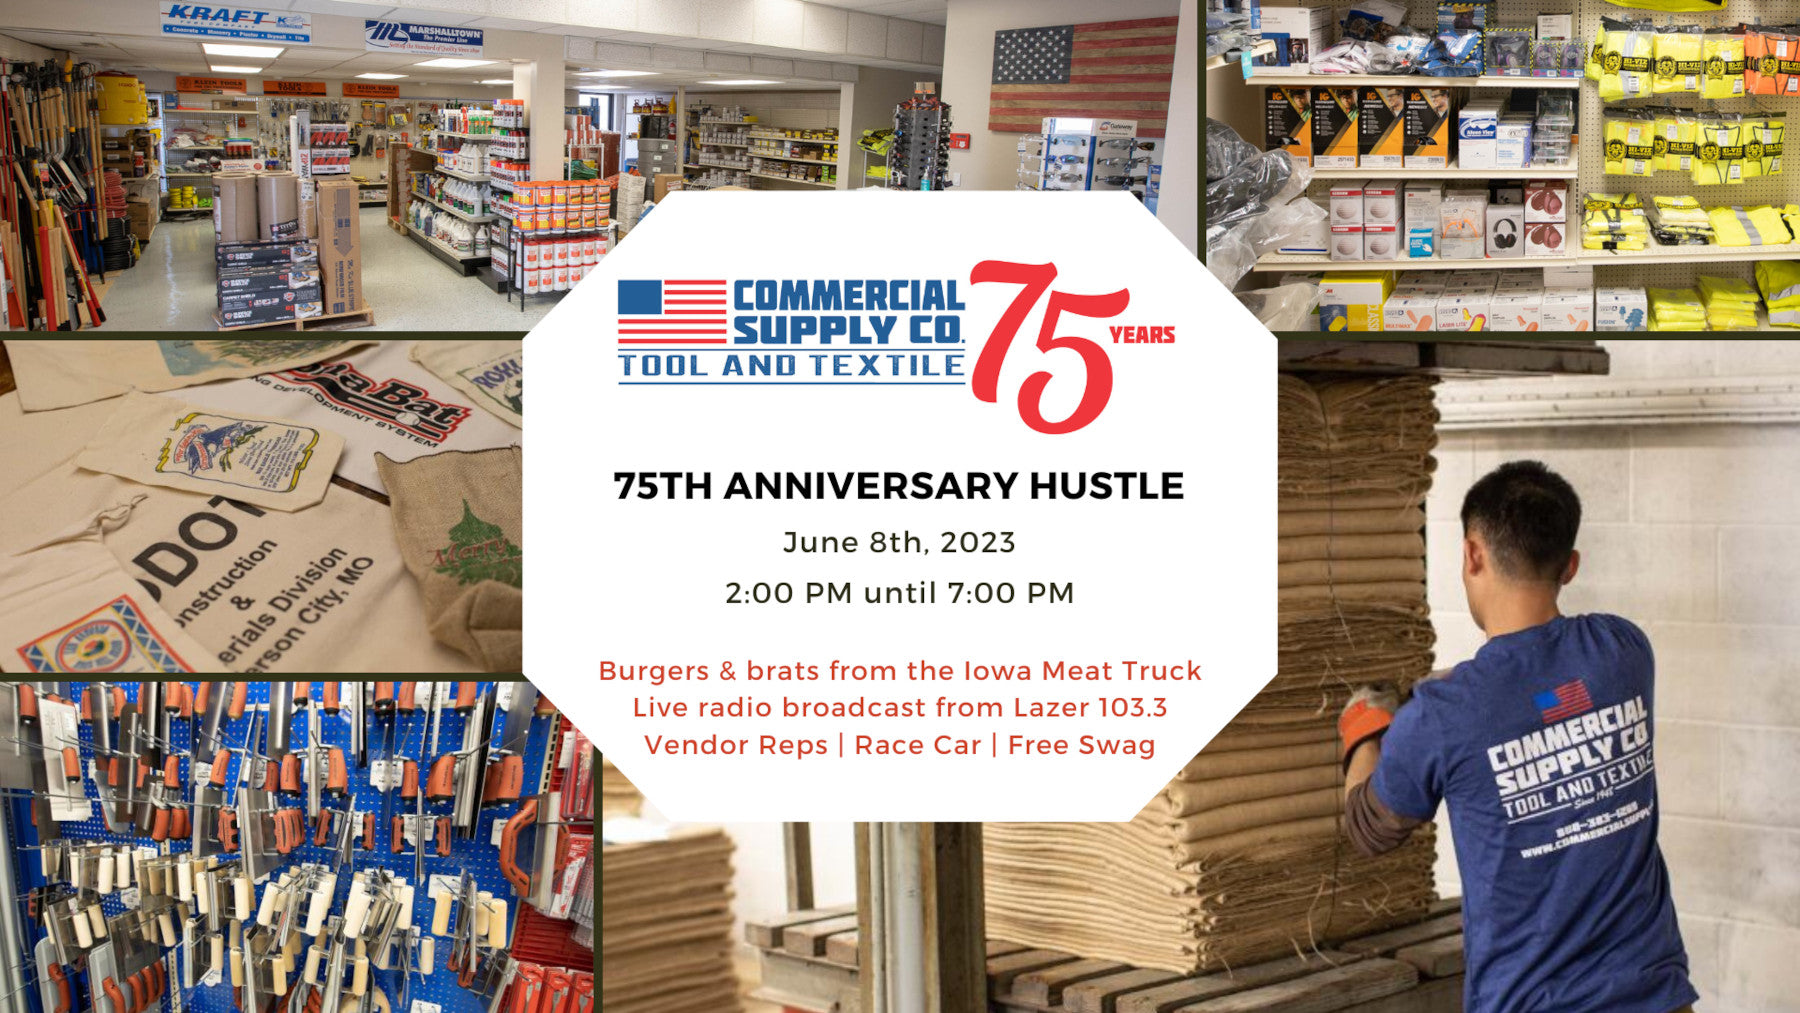 75th Anniversary Event - June 8, 2023 from 2p - 7p